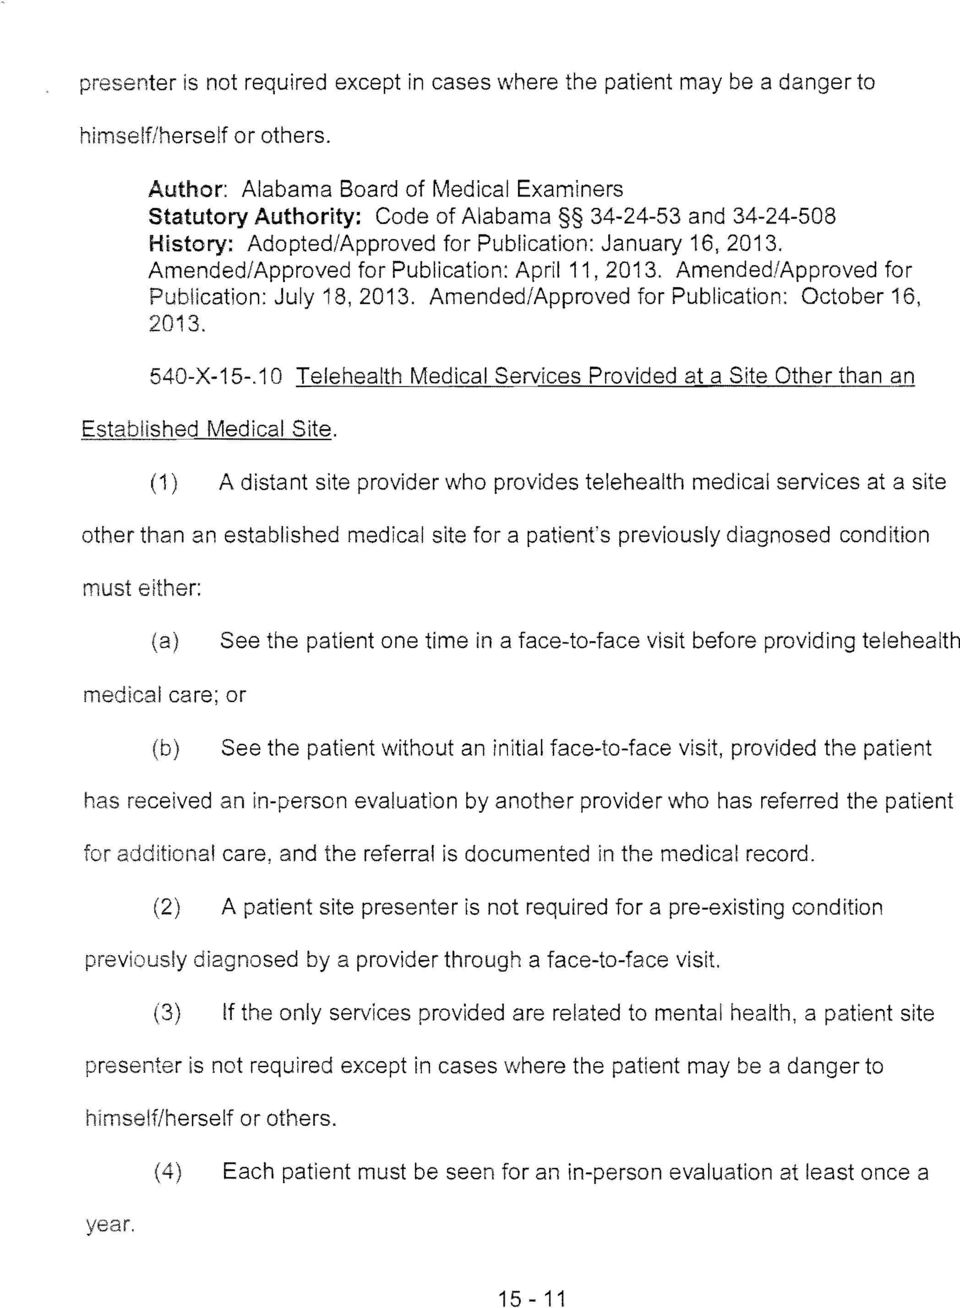 (1) A distant site provider who provides telehealth medical services at a site other than an established medical site for a patient's previously diagnosed condition (a) See the patient one time in a